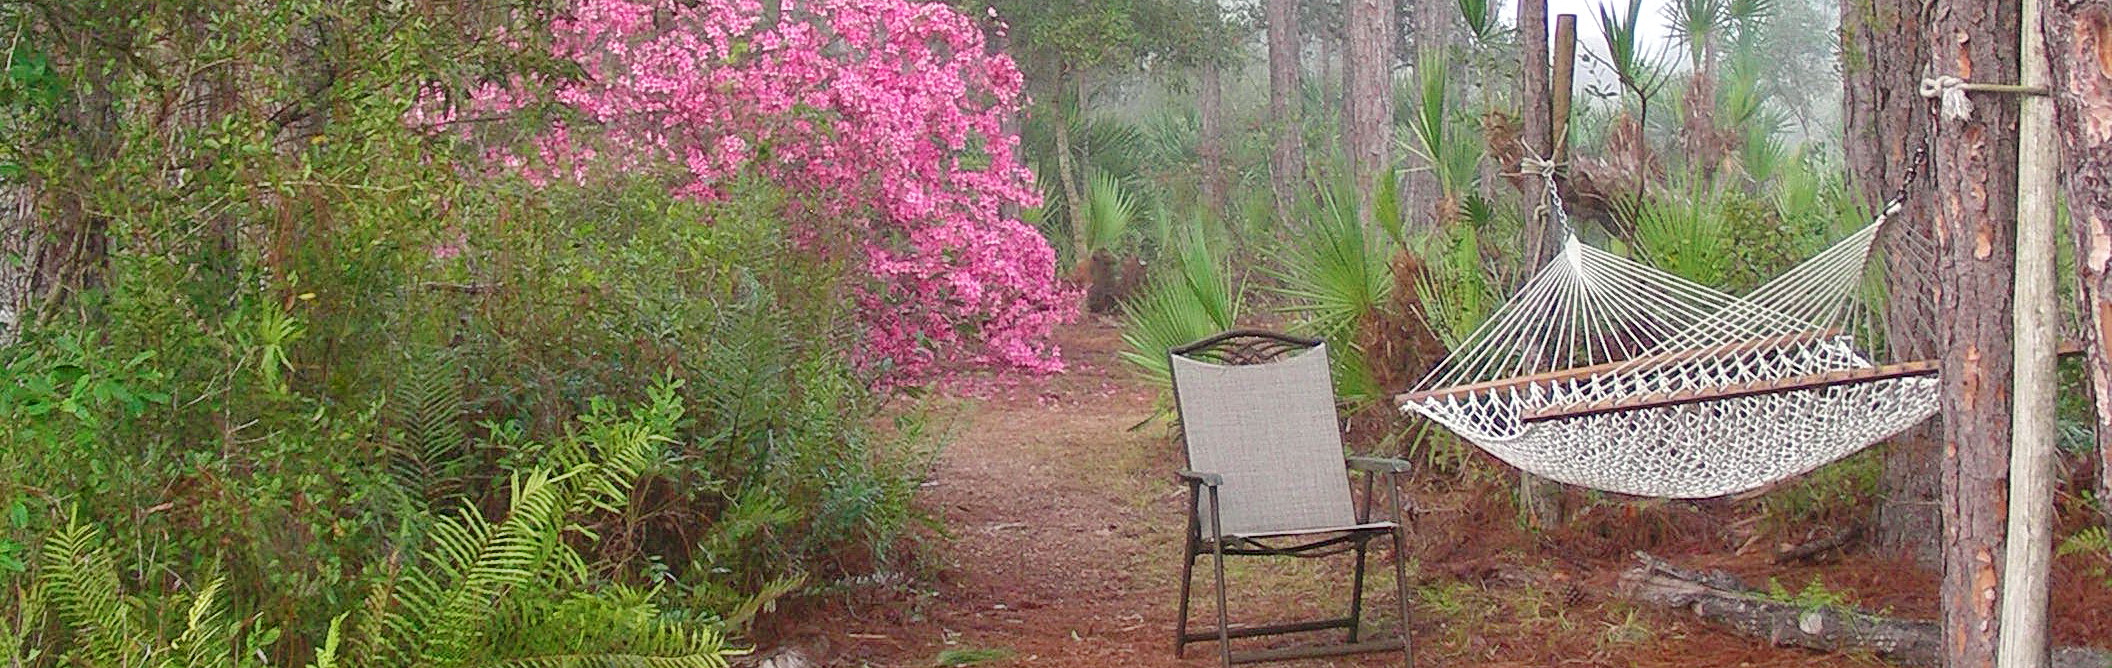 Landscaping with Natives is Florida Smart!>